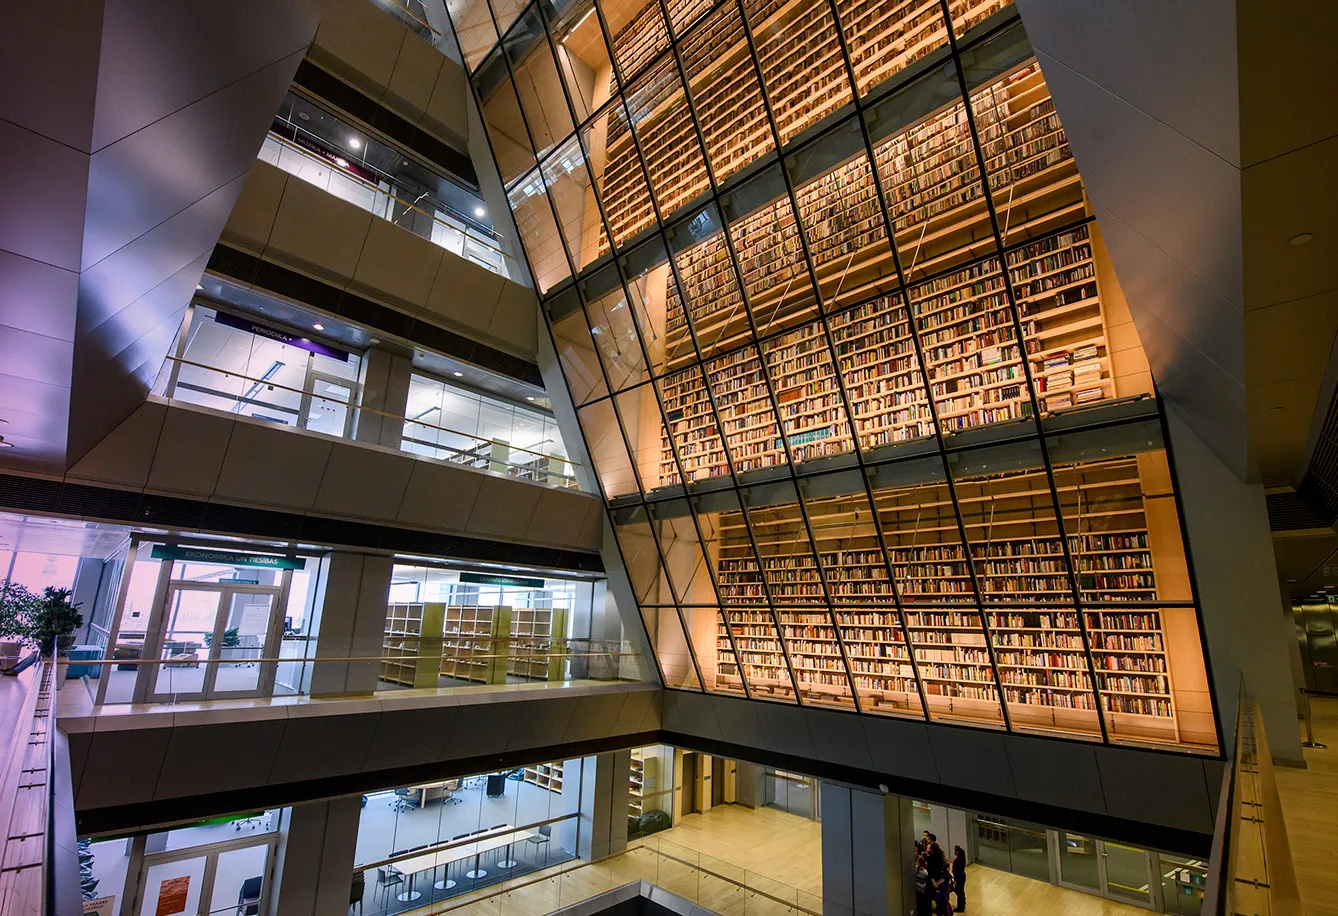 Interior of the National Library of Latvia in Riga